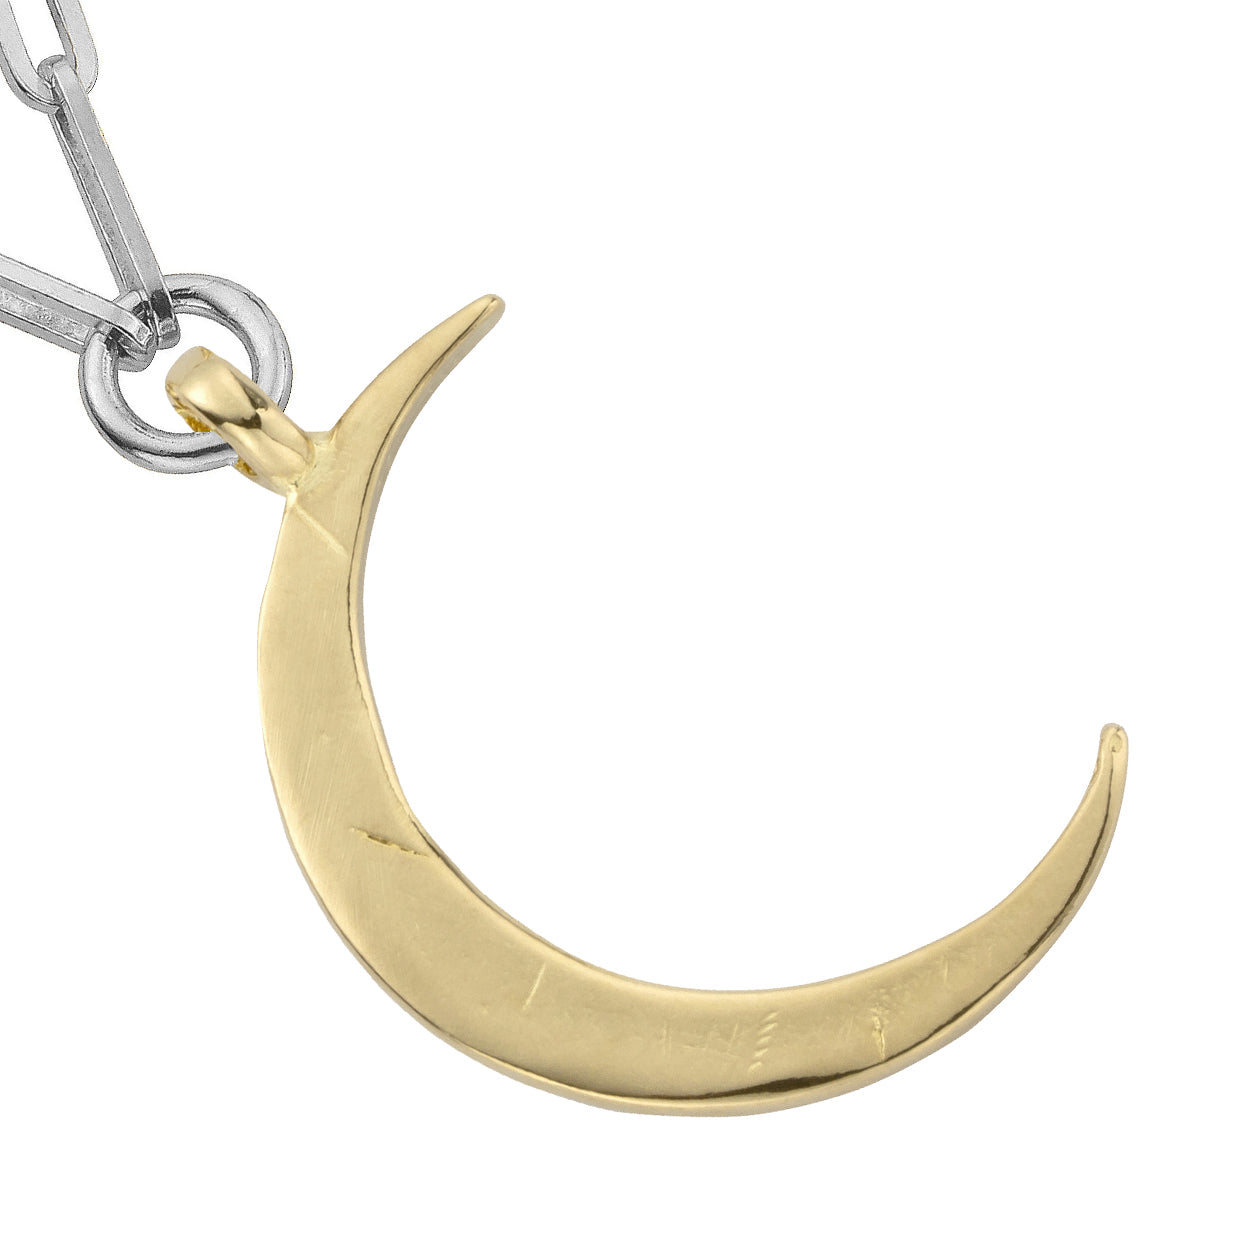 Silver & Gold Large Crescent Moon Trace Chain Necklace